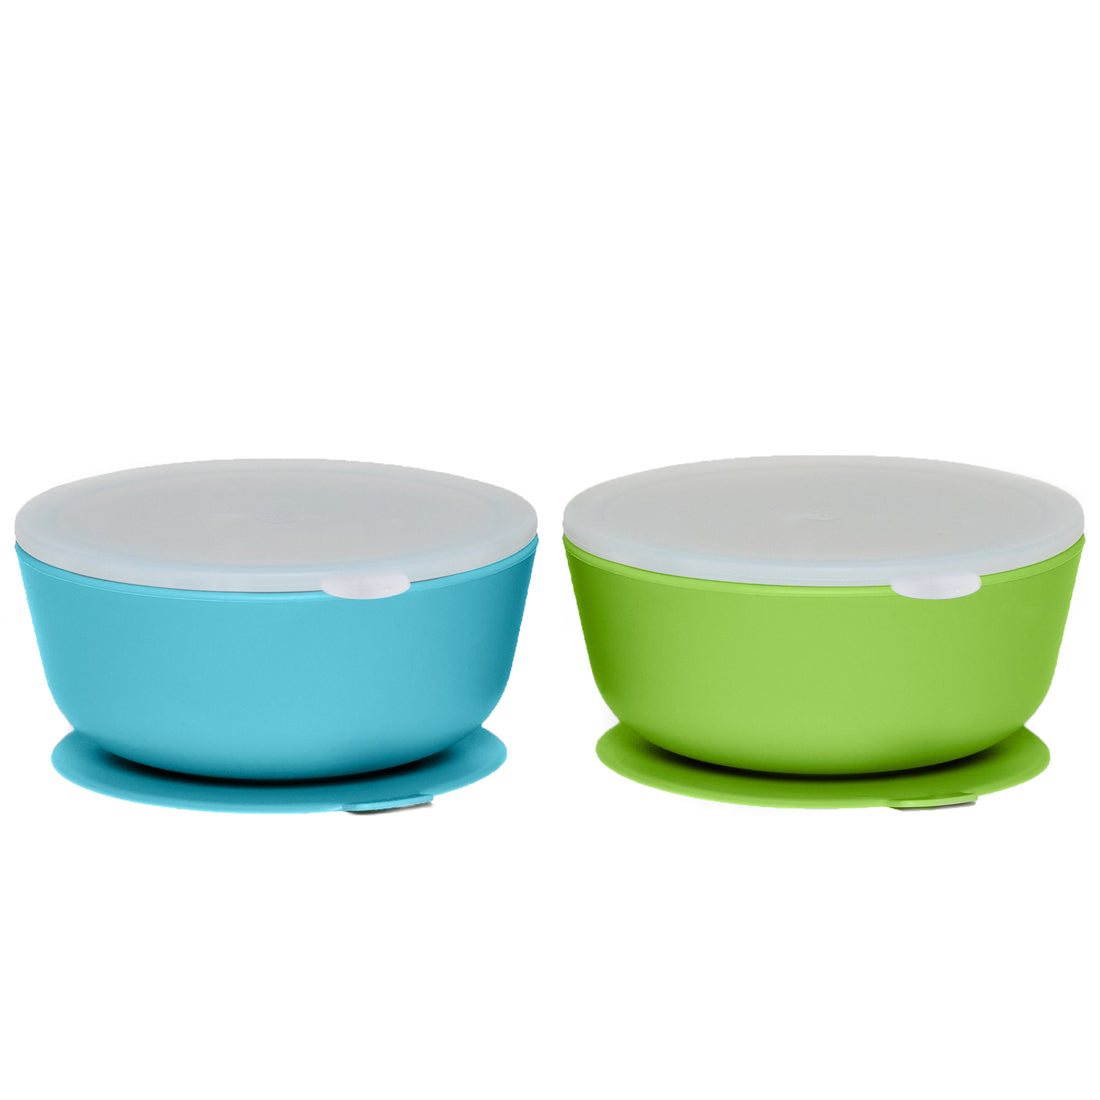  Best Suction Baby Bowls for Toddlers-Toddler Bowls